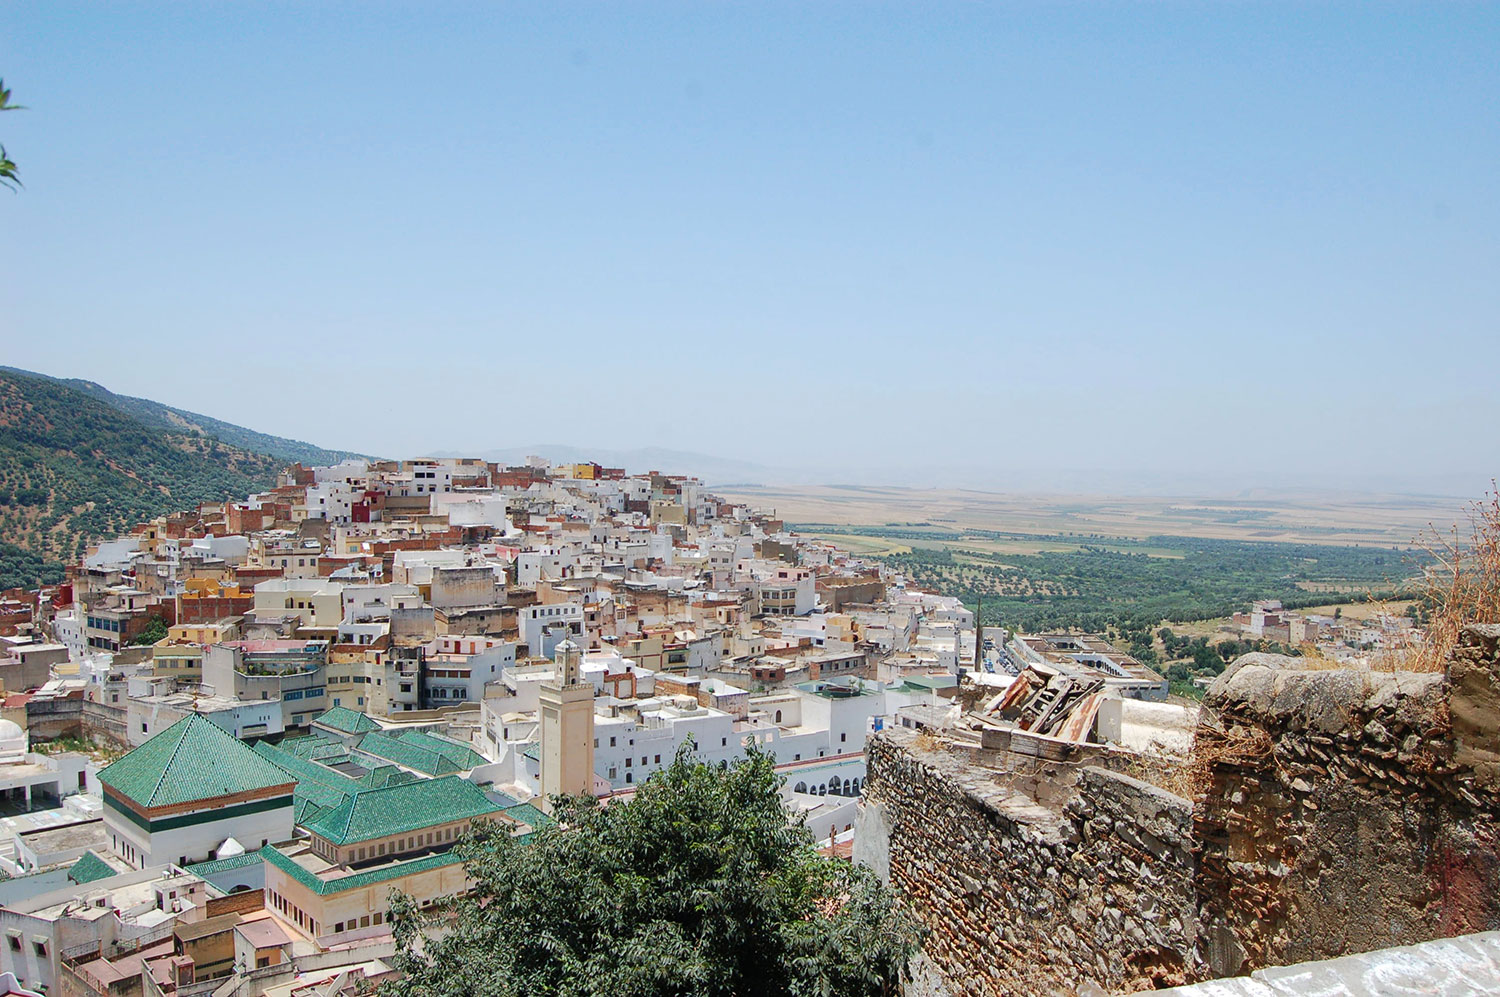 View of Moulay Idriss Zerhoun with the shrine of Mulay Idris I in the lower left